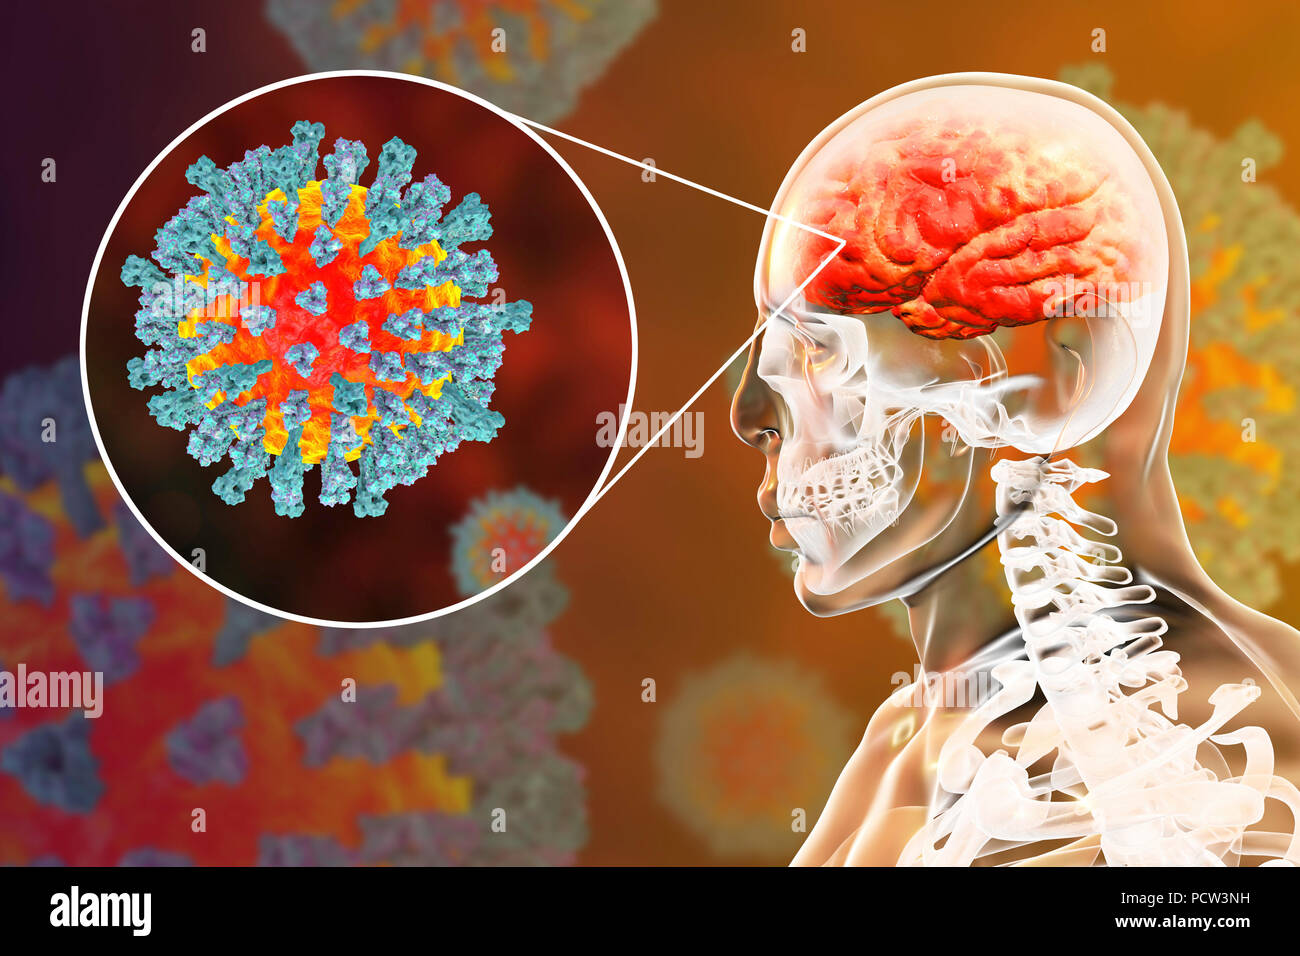 Encephalitis caused by measles viruses, computer illustration. This virus, from the Morbillivirus group of viruses, consists of an RNA (ribonucleic acid) core surrounded by an envelope studded with surface proteins haemagglutinin-neuraminidase and fusion protein, which are used to attach to and penetrate a host cell. Measles is a highly infectious itchy rash with a fever. It mainly affects children and one attack usually gives life-long immunity. Encephalitis is one of complications of measles infection. Stock Photo